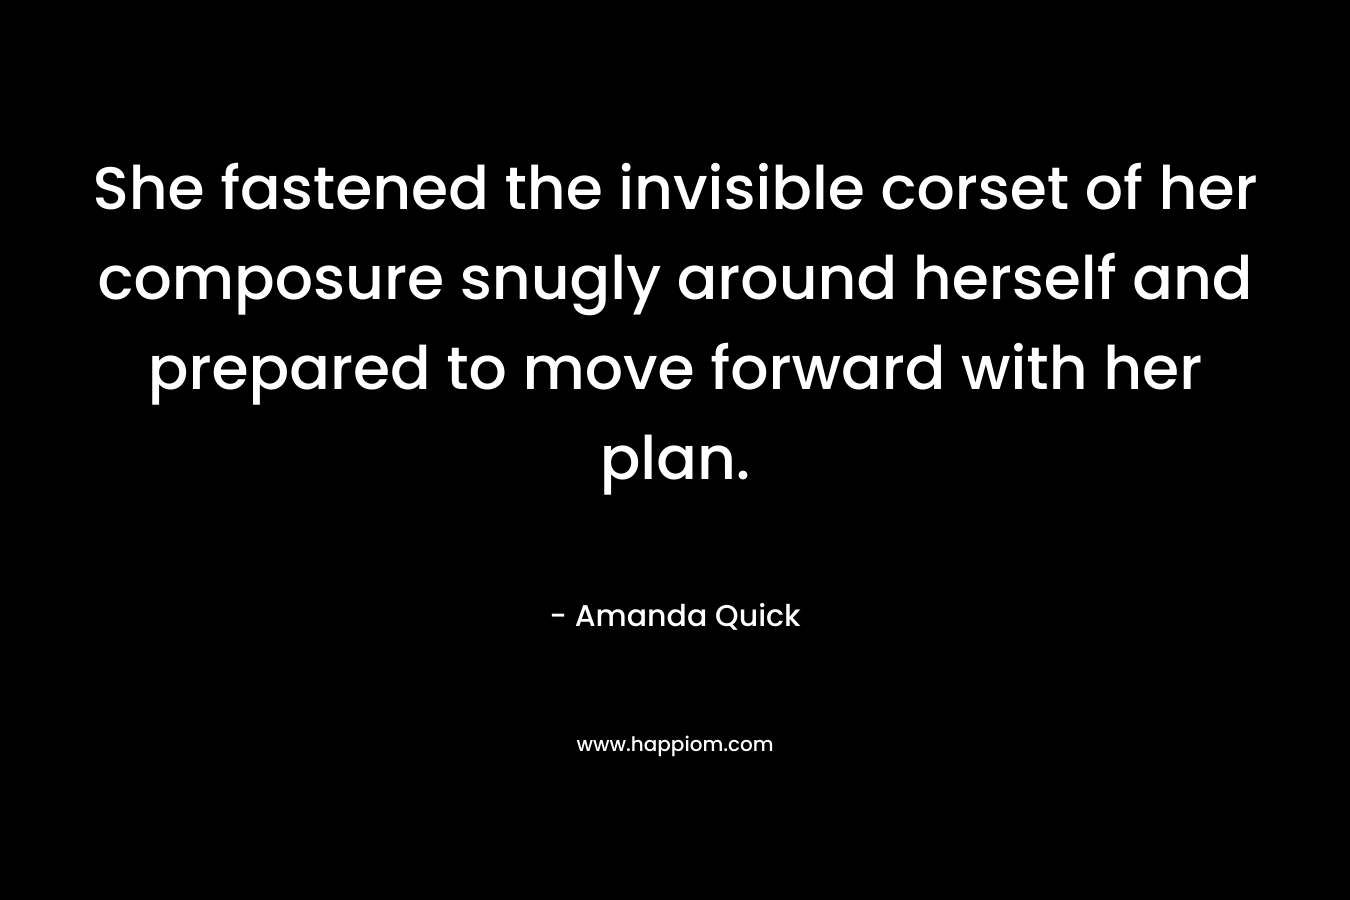 She fastened the invisible corset of her composure snugly around herself and prepared to move forward with her plan. – Amanda Quick